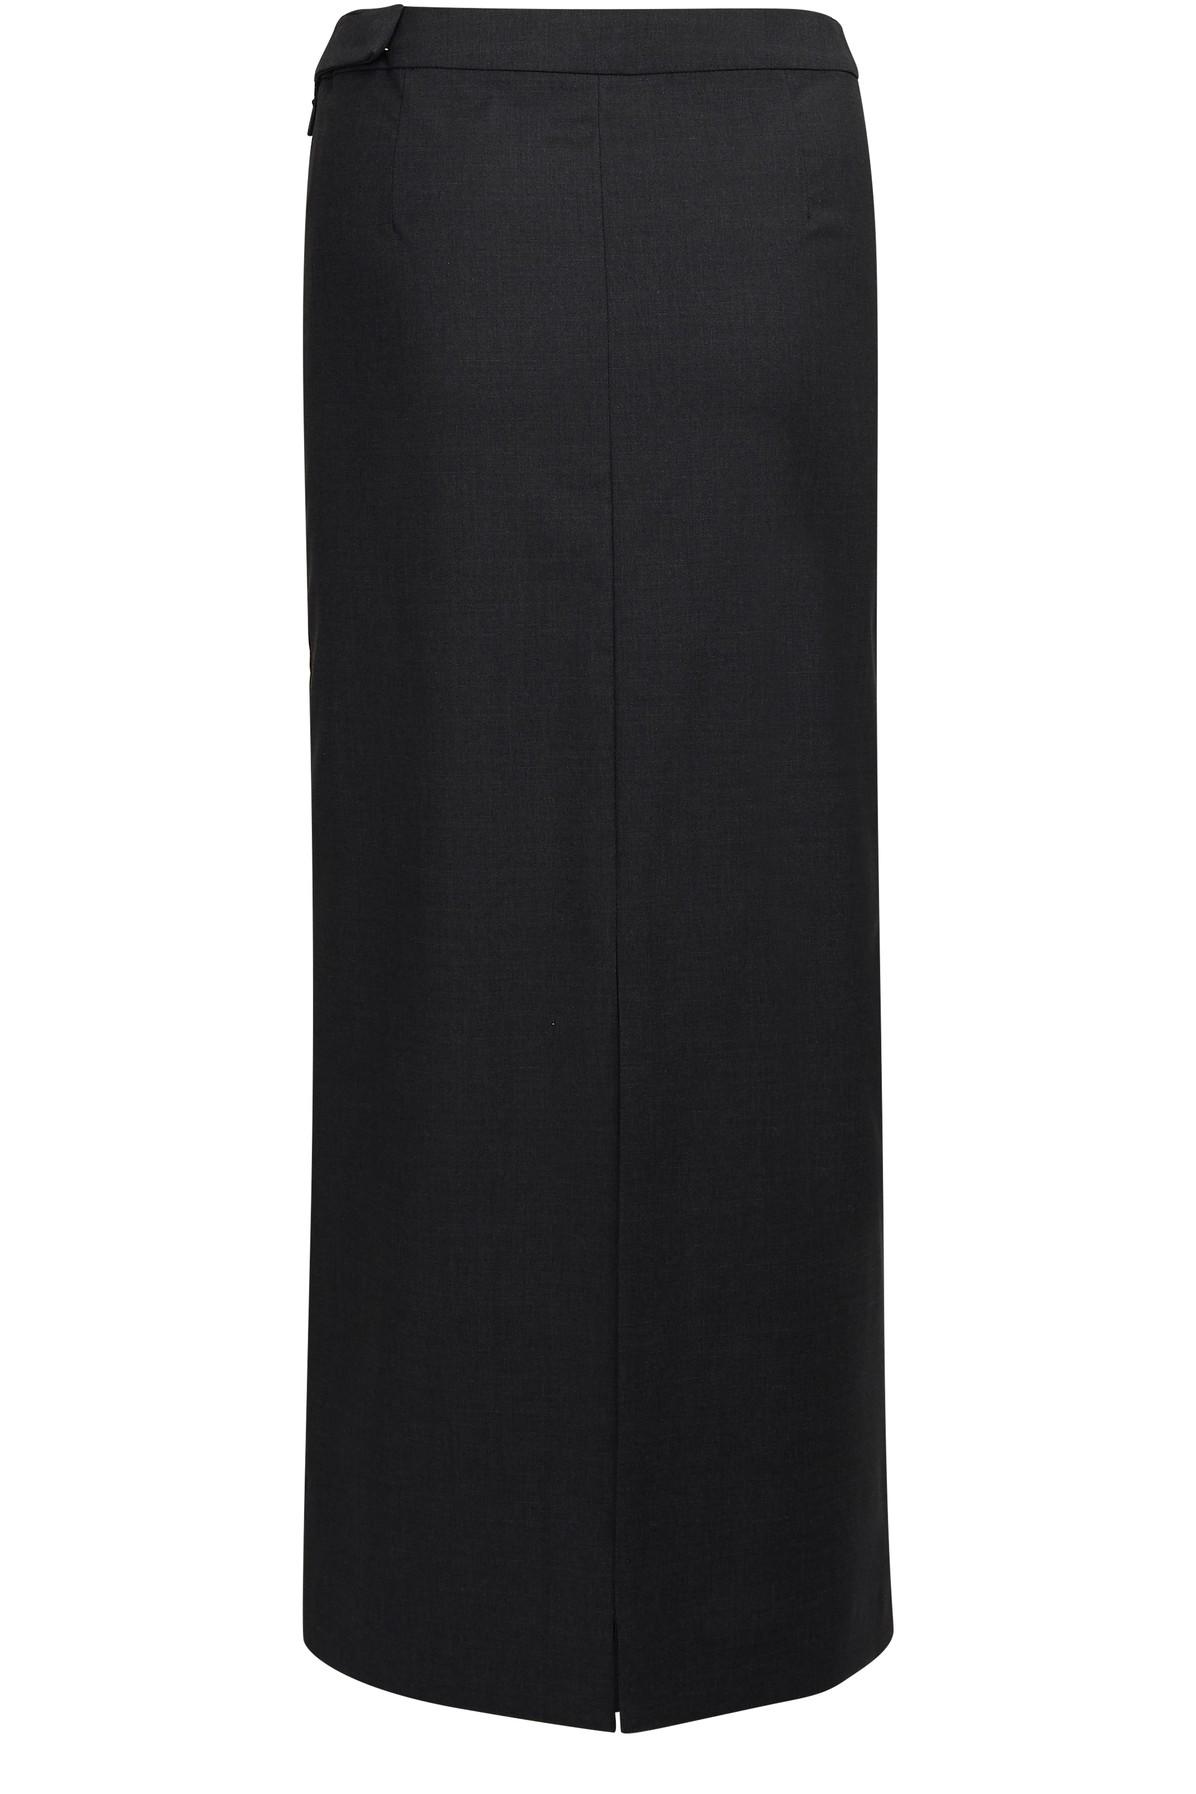 The Row Pol Skirt In Wool And Silk in Anthracite (Black) - Lyst